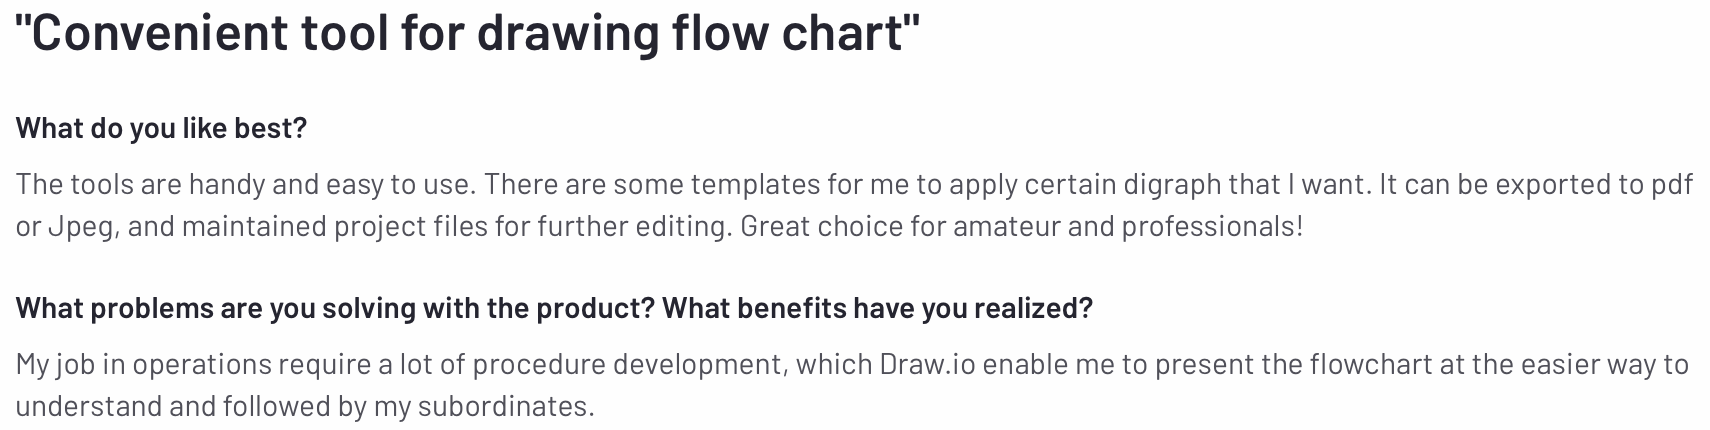 draw.io review from real users on G2.com